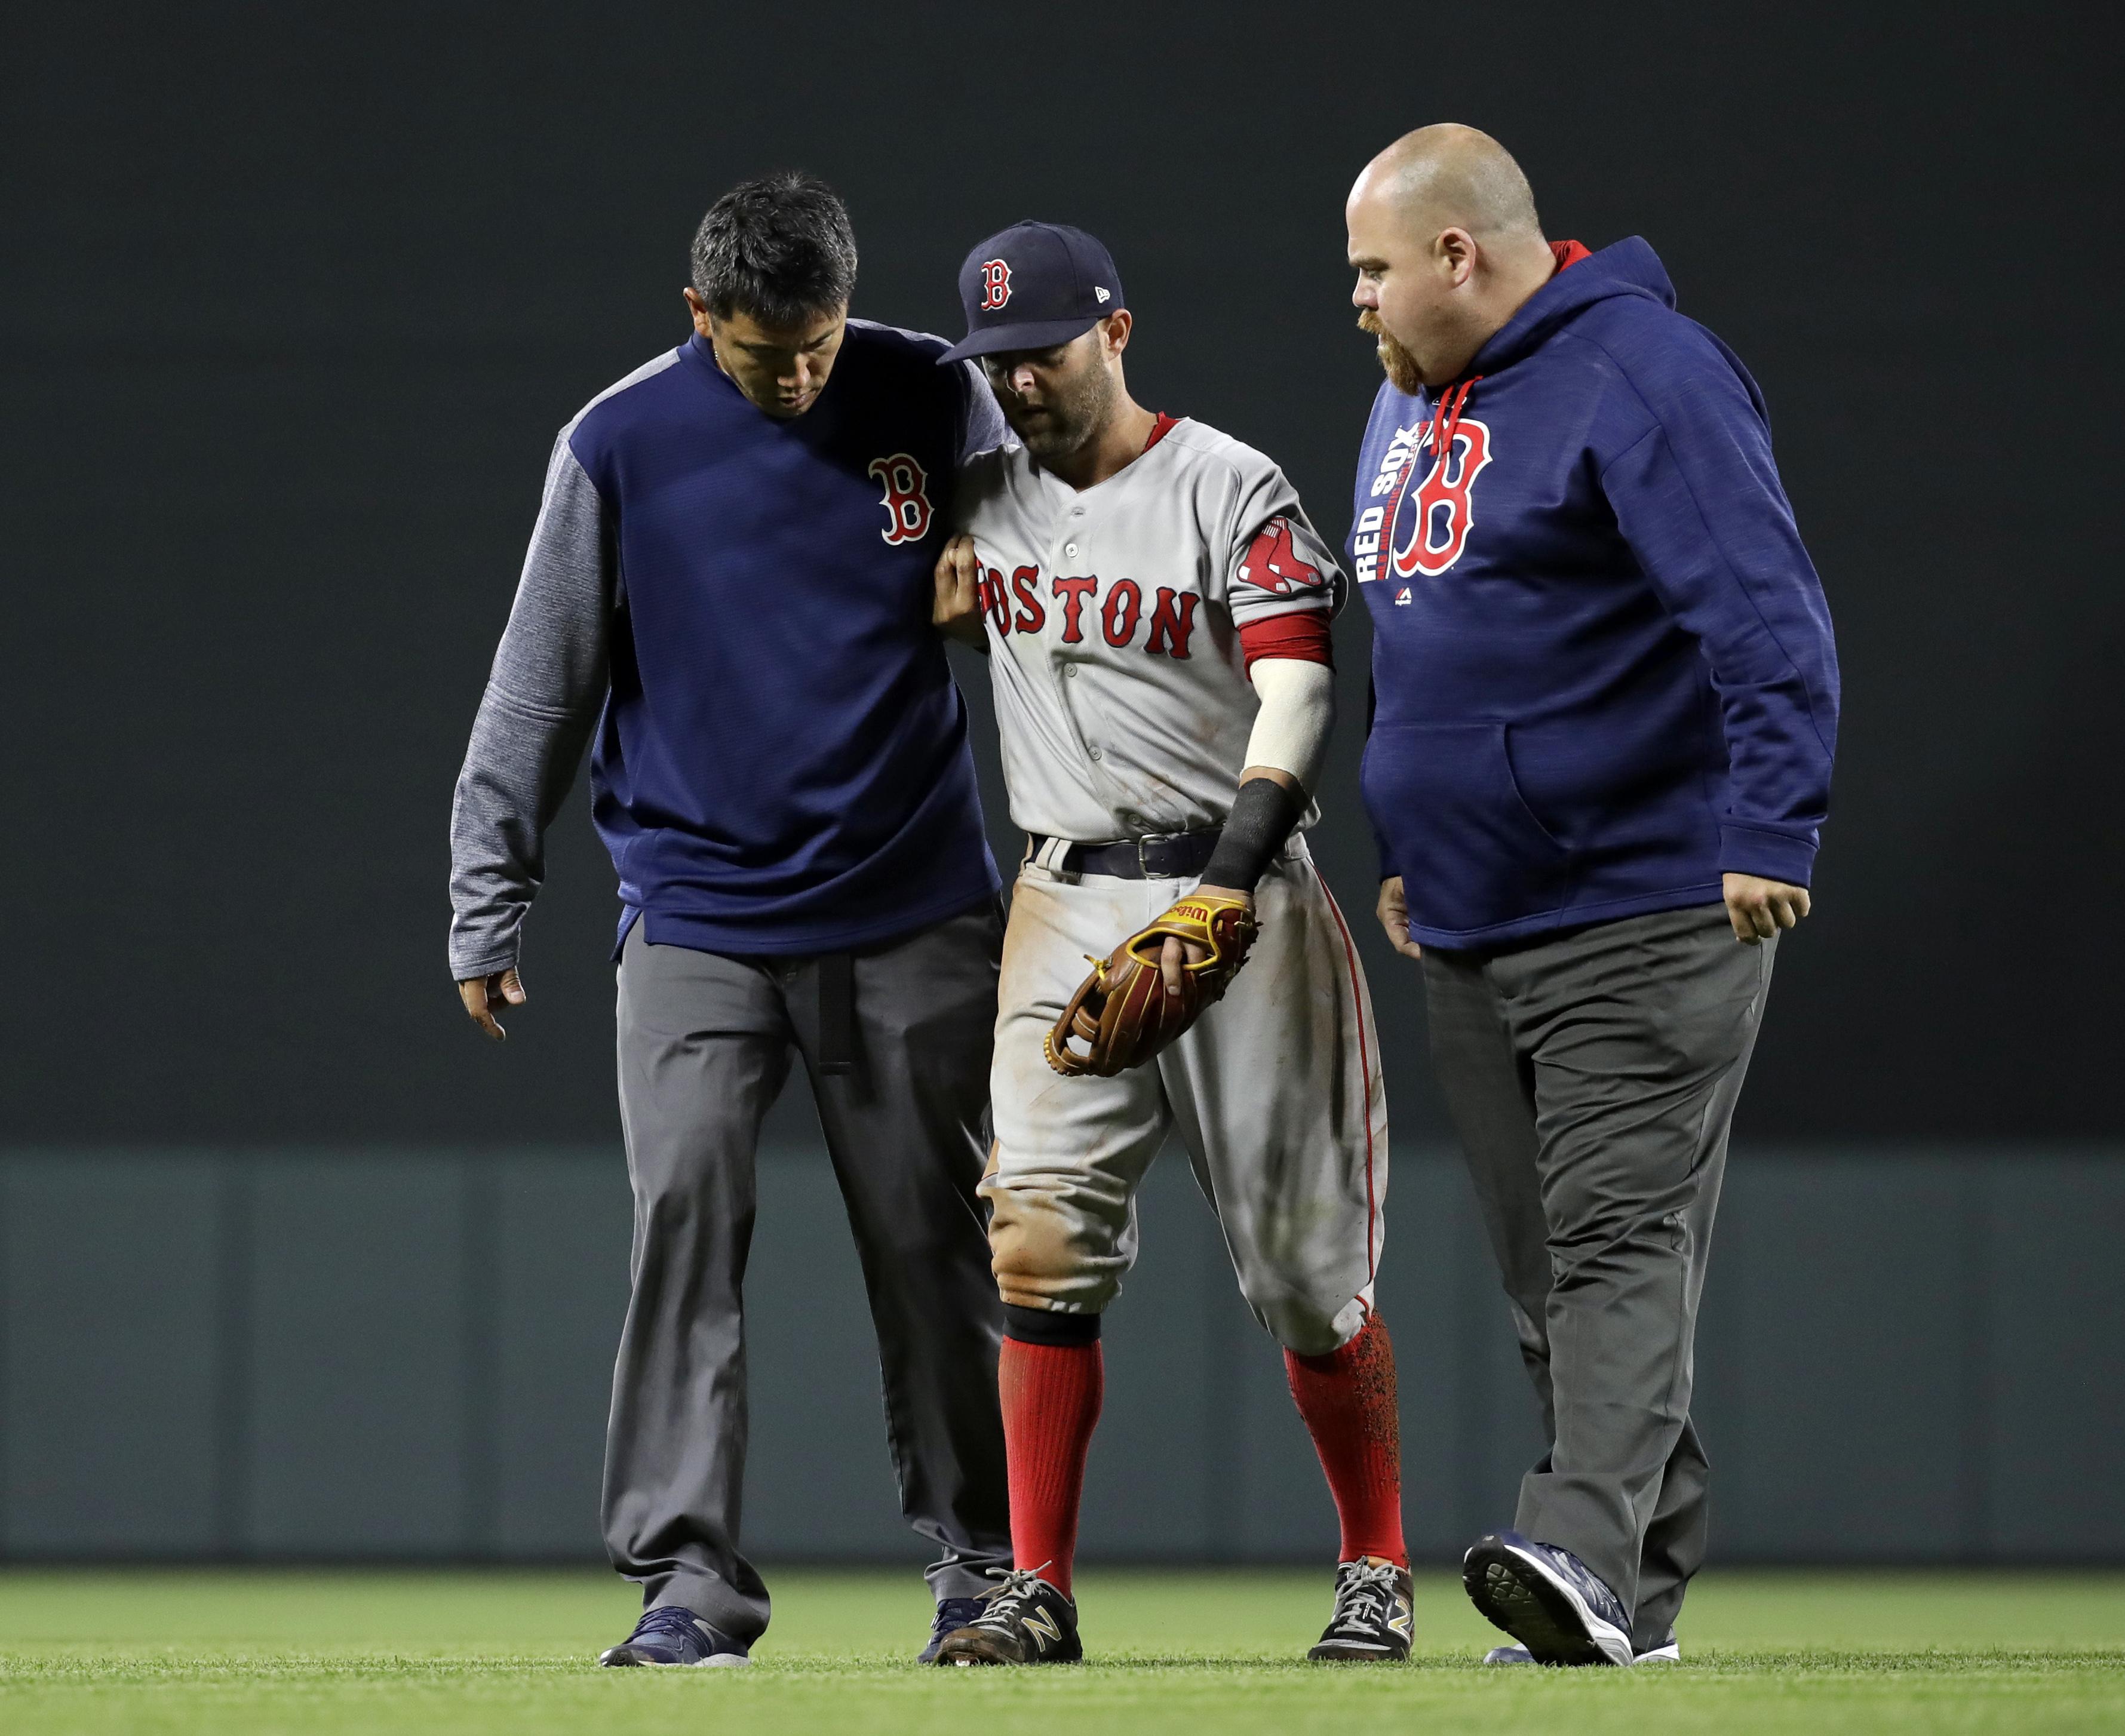 Does Dustin Pedroia Ever Want To Be Manager Of Red Sox?